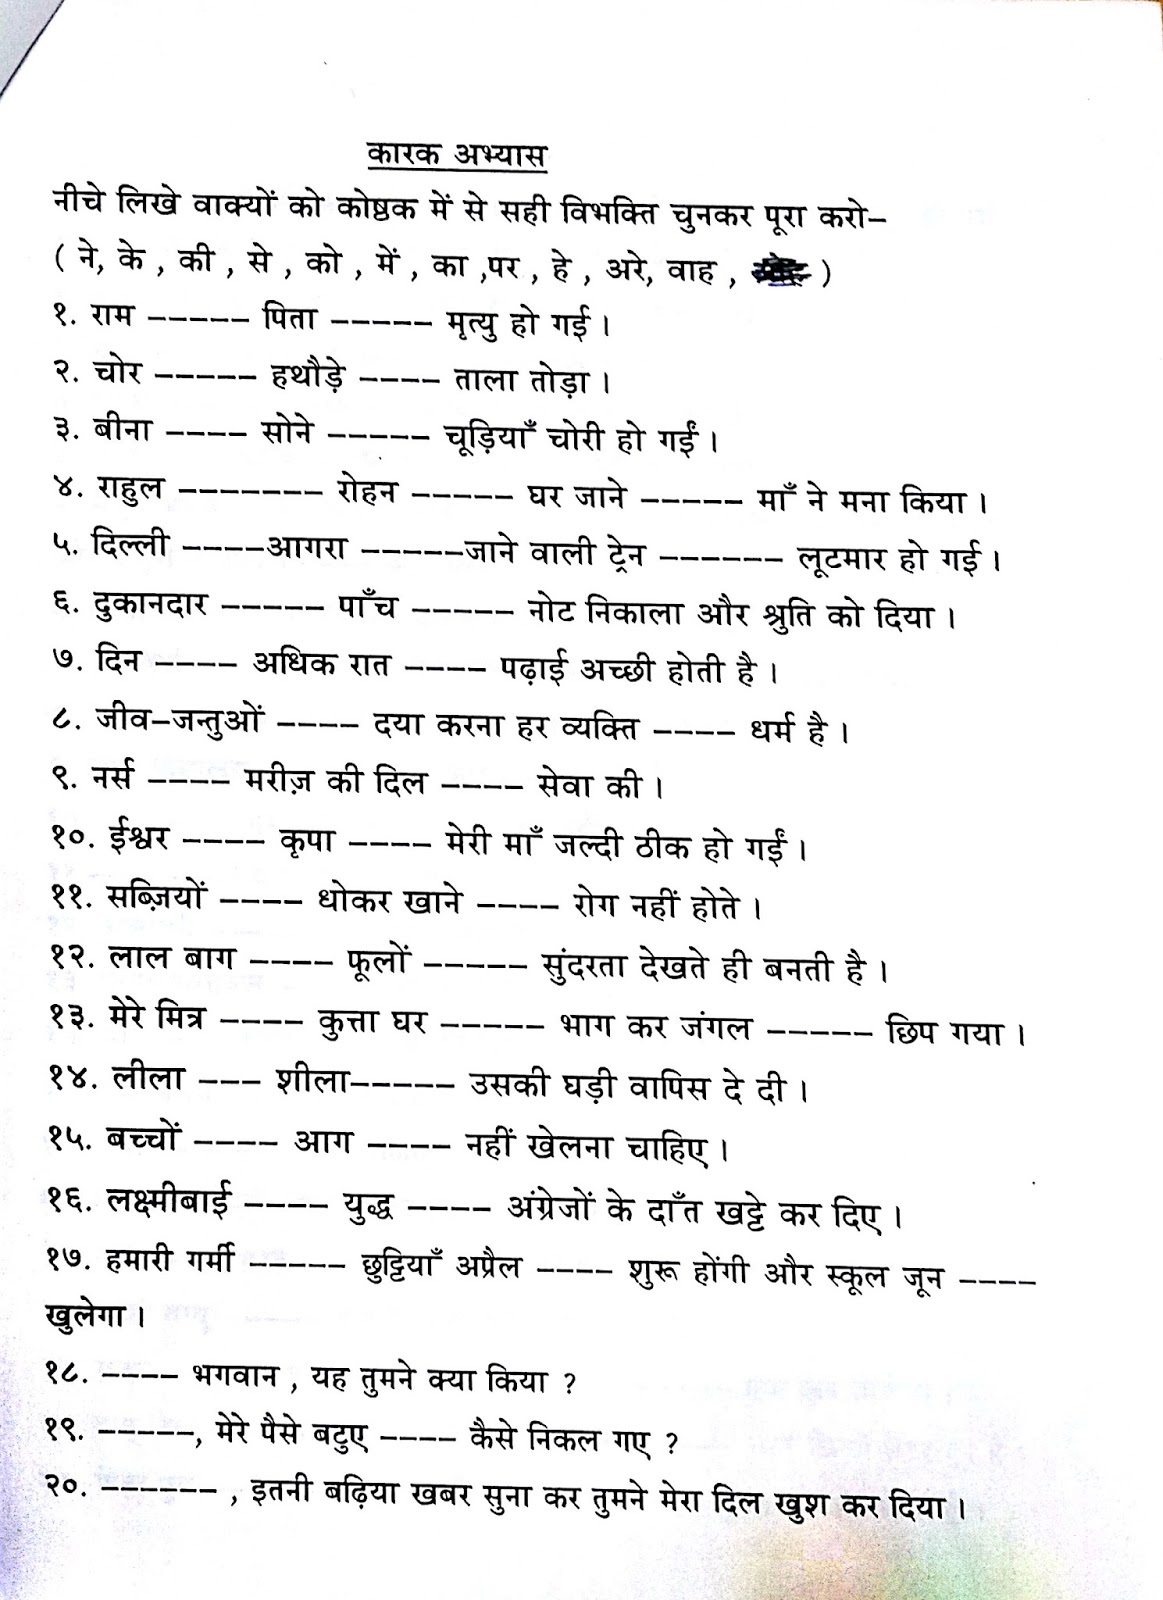 hindi-grammar-work-sheet-collection-for-classes-5-6-7-8-cases-or-karak-work-sheets-for